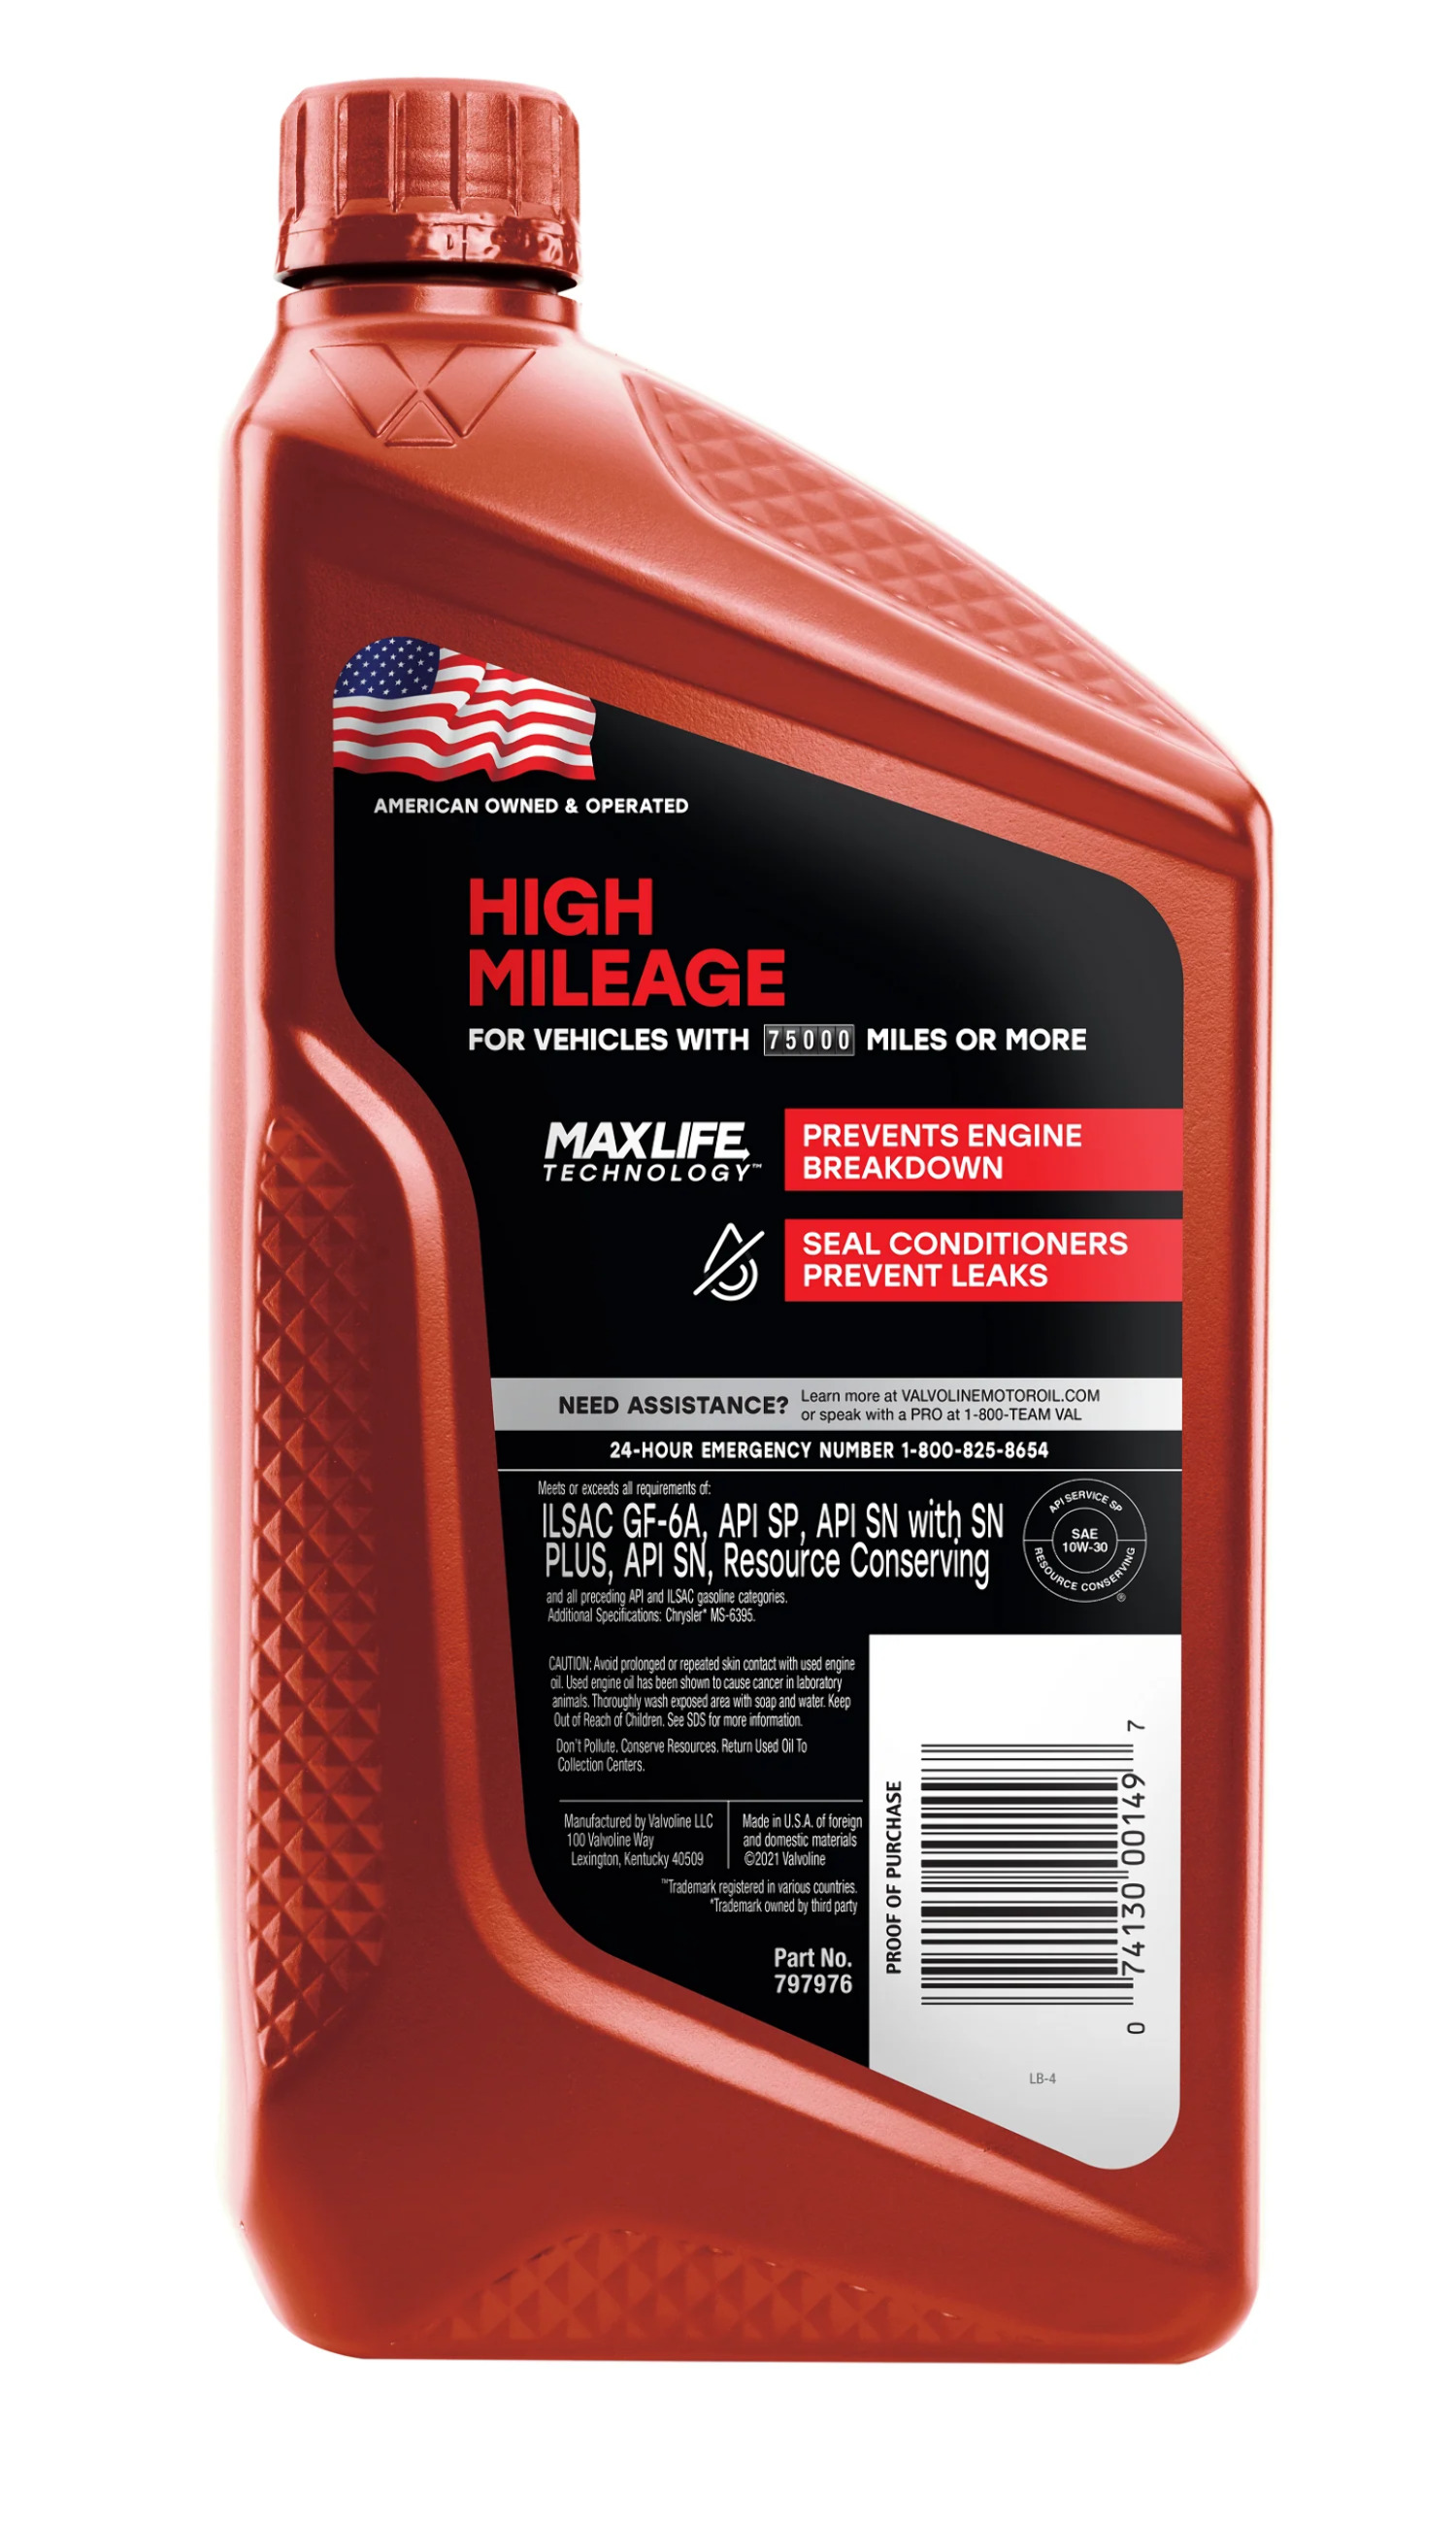 Valvoline High Mileage with MaxLife Technology Motor Oil SAE 10W-30 - image 4 of 10